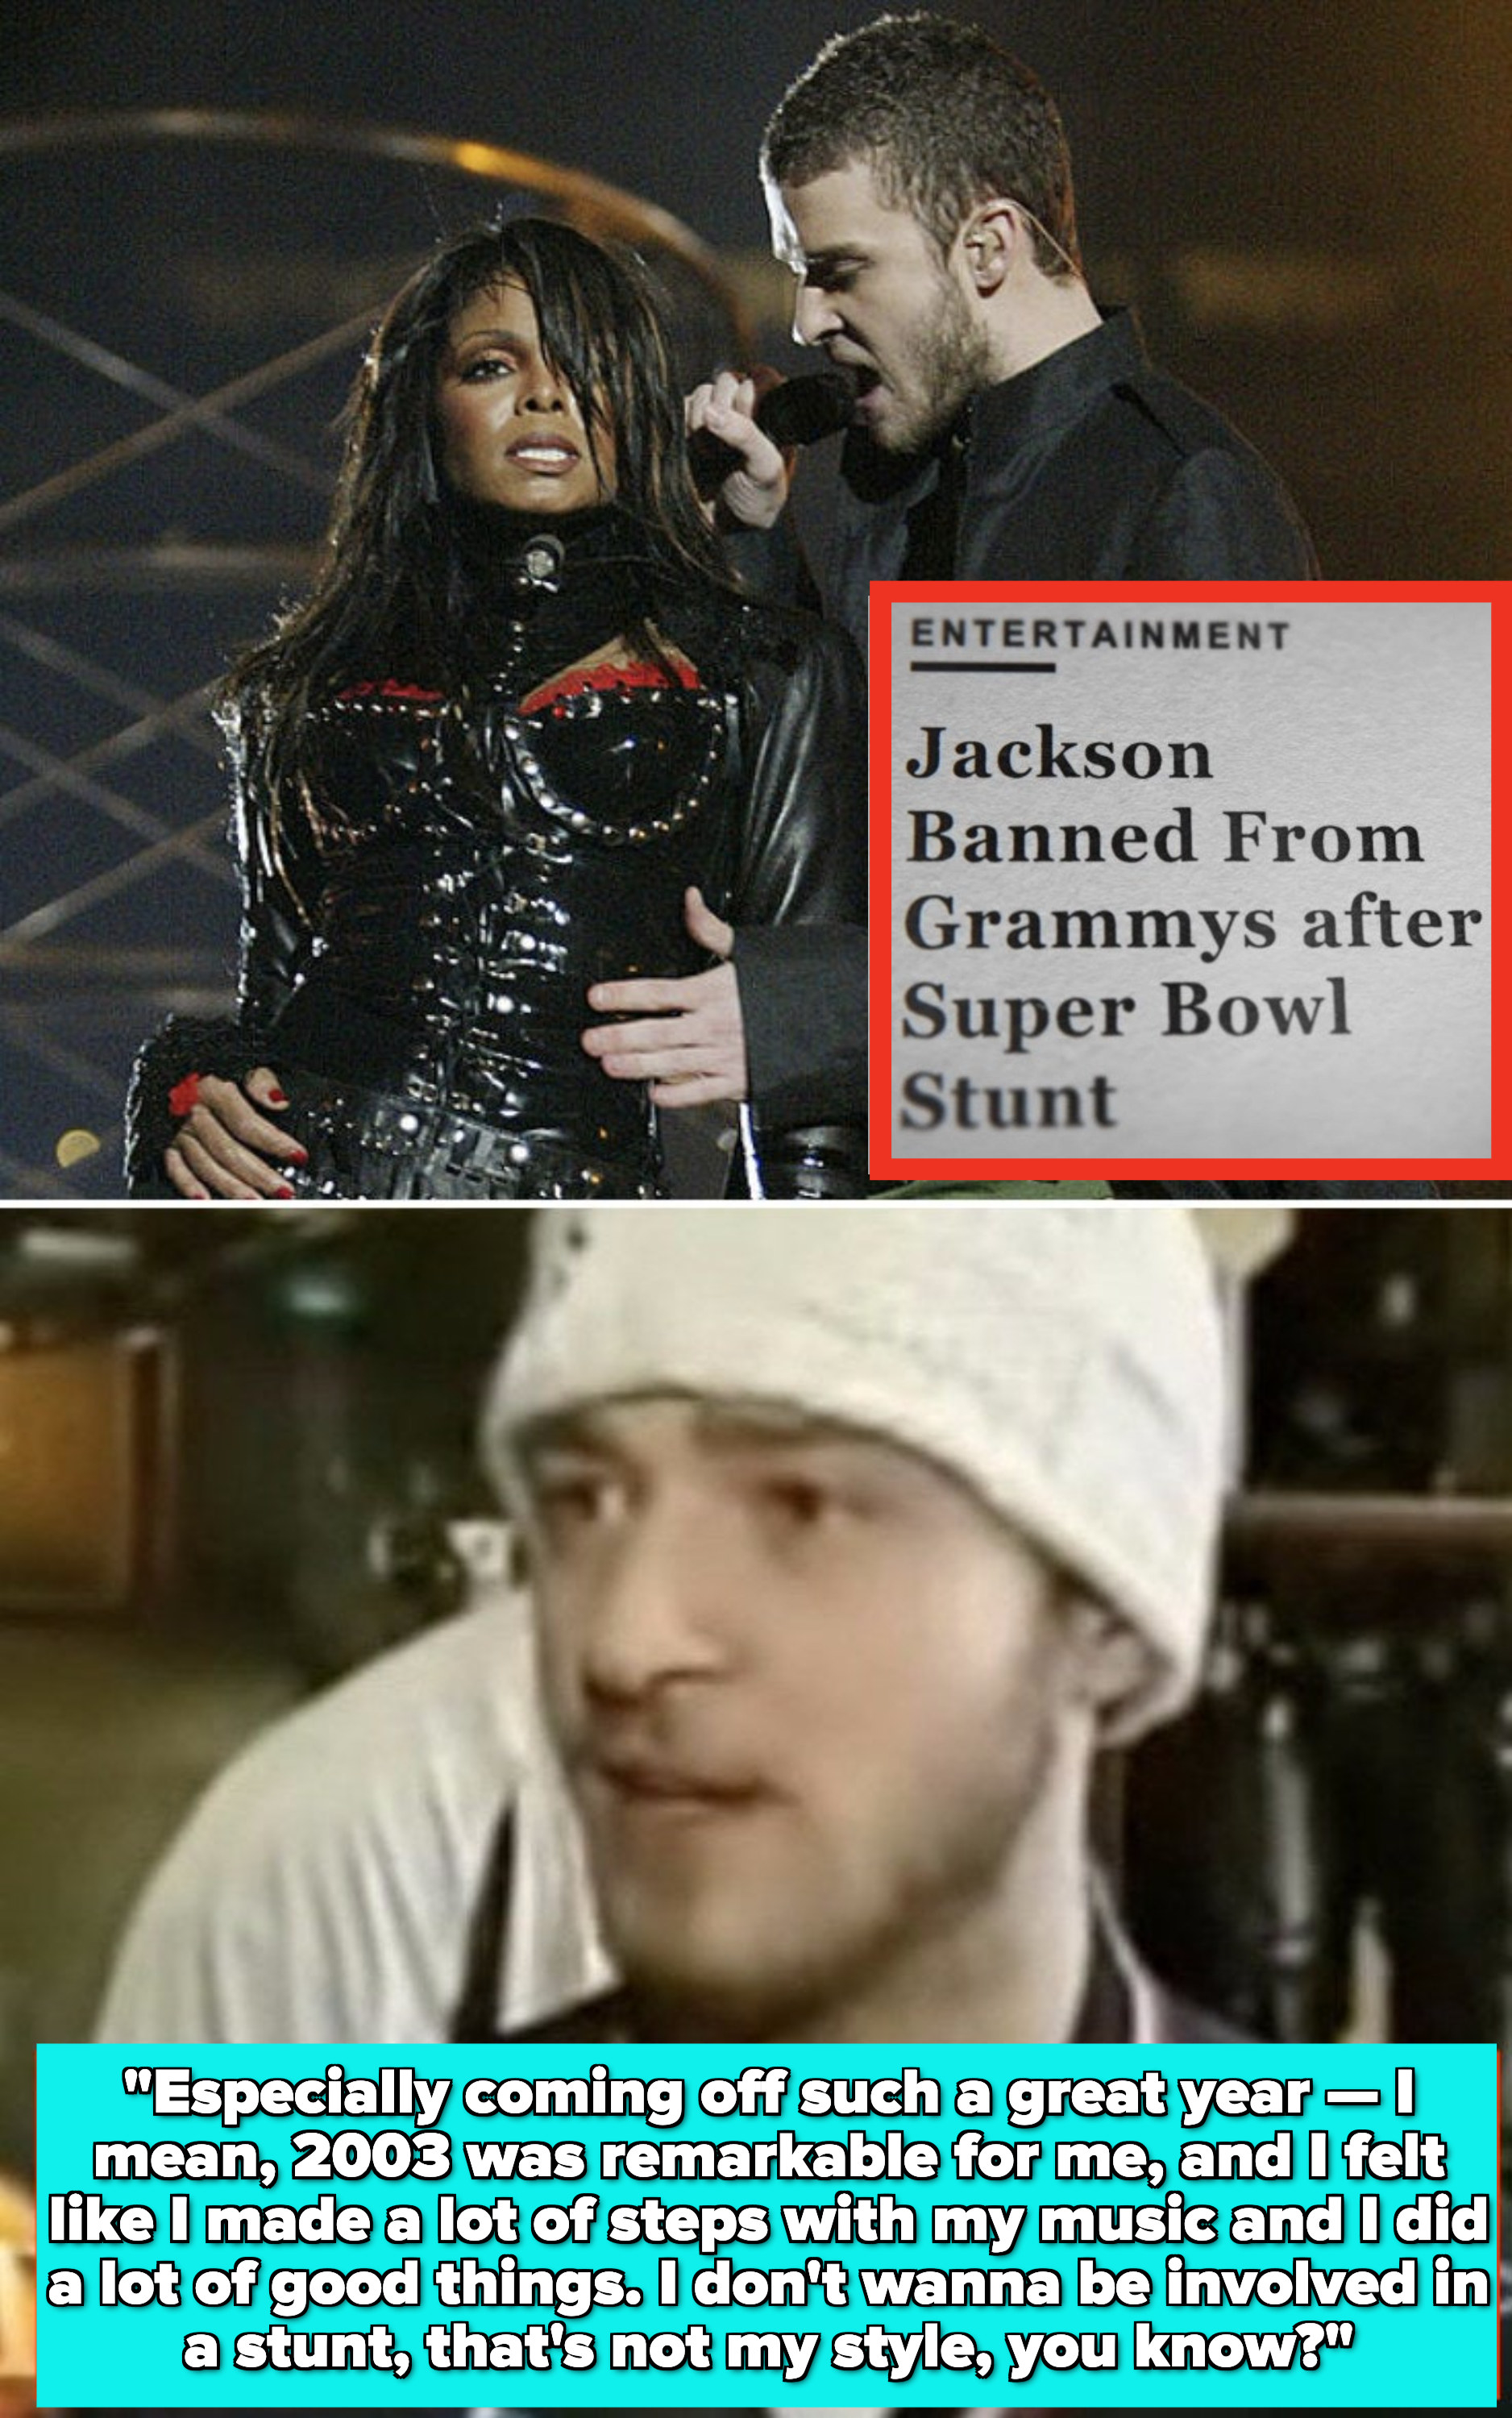 Jackson and Timberlake performing at the Super Bowl in 2004; Newspaper headline that reads: &quot;Jackson Banned From Grammys after Super Bowl Stunt;&quot; Timberlake &quot;defending&quot; himself in a 2004 interview, saying it wasn&#x27;t his style to be involved in a &quot;stunt&quot;